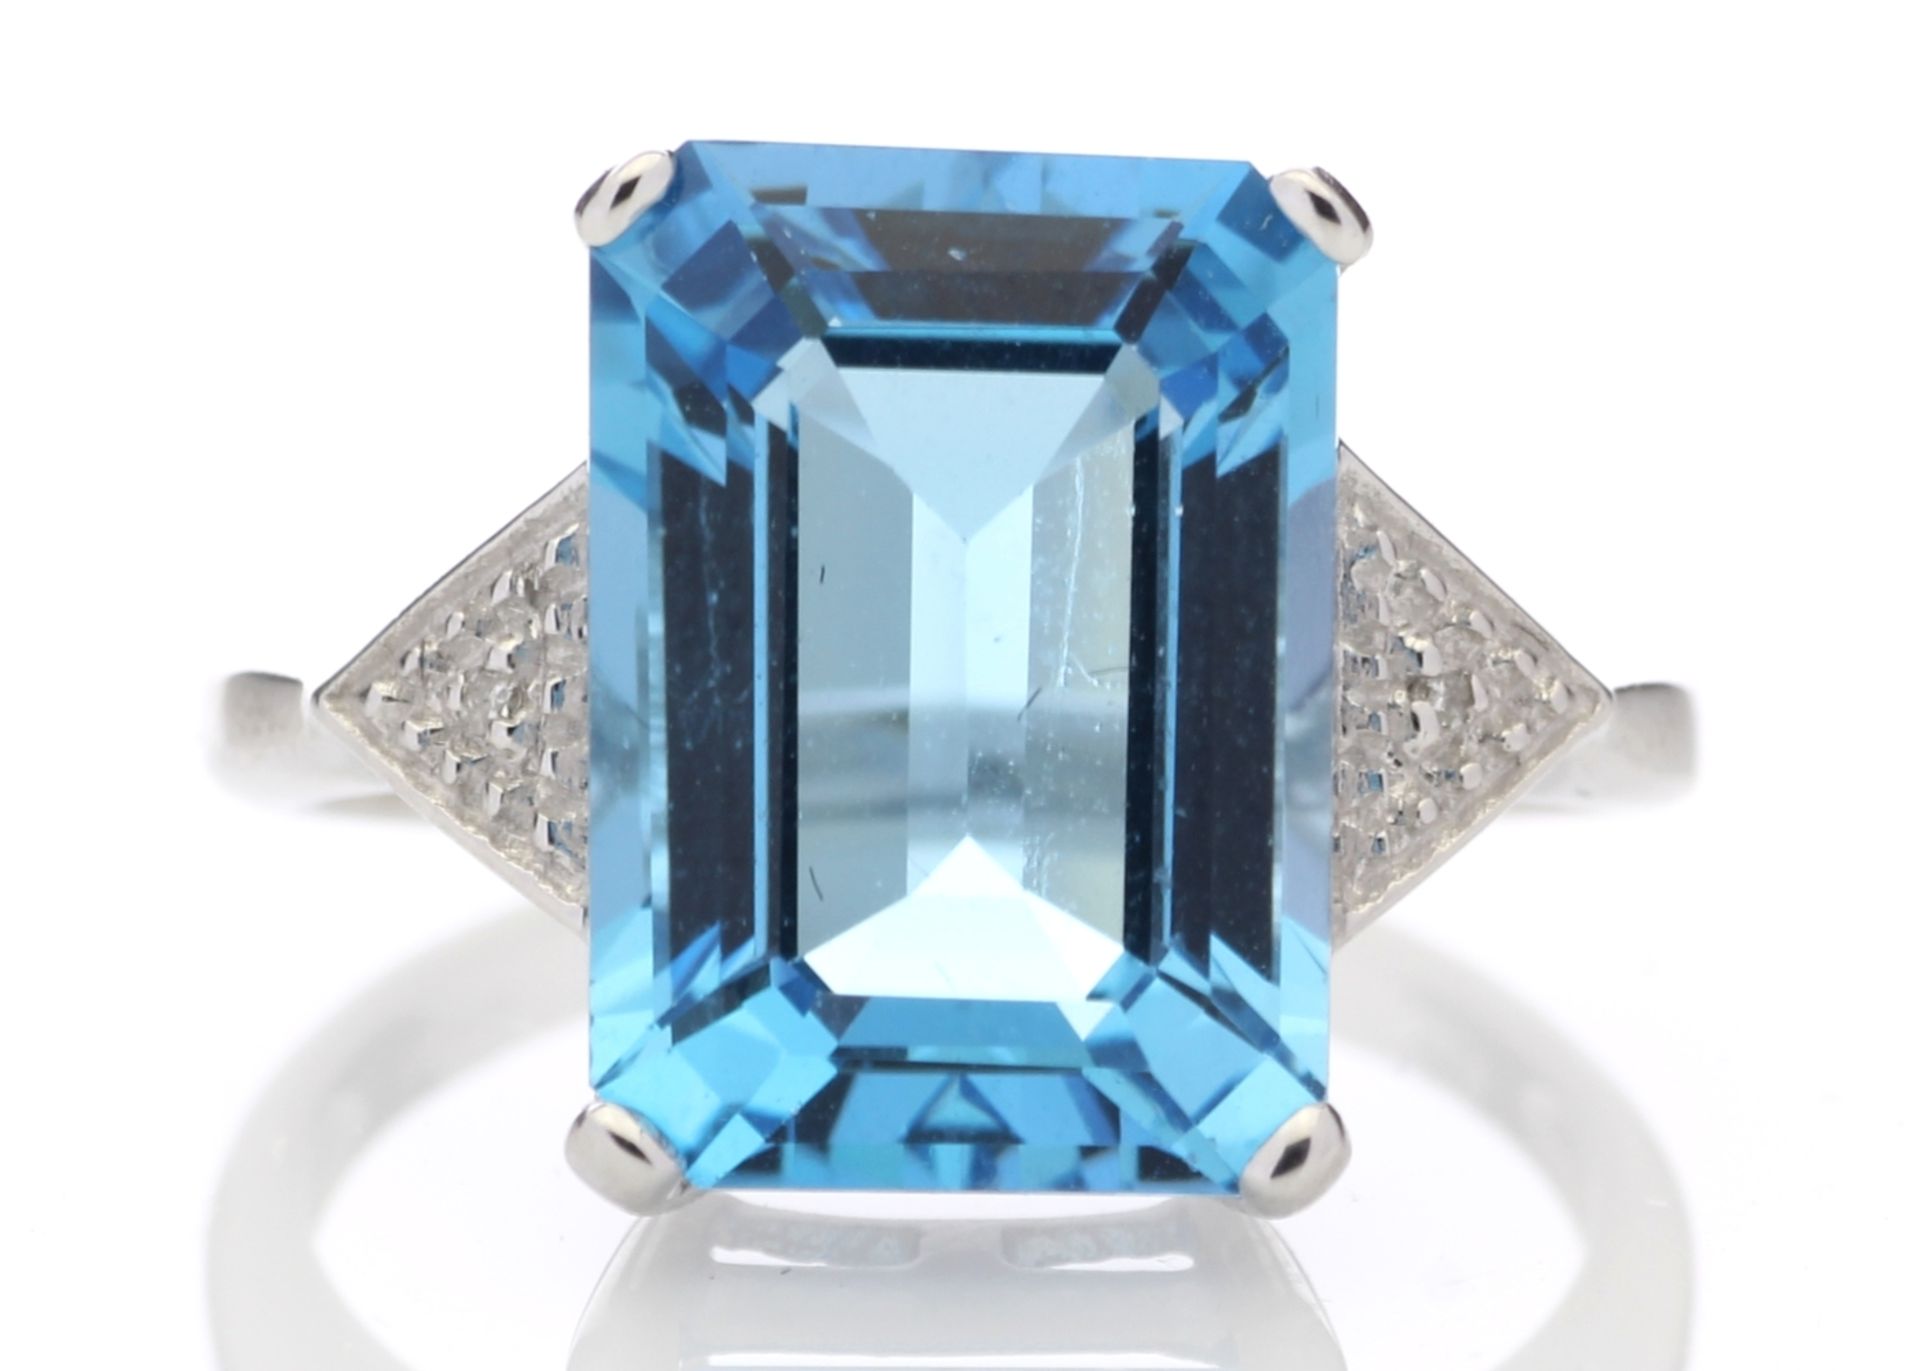 9ct White Gold Diamond And Blue Topaz Ring 0.01 Carats - Valued by GIE £1,620.00 - This stunning